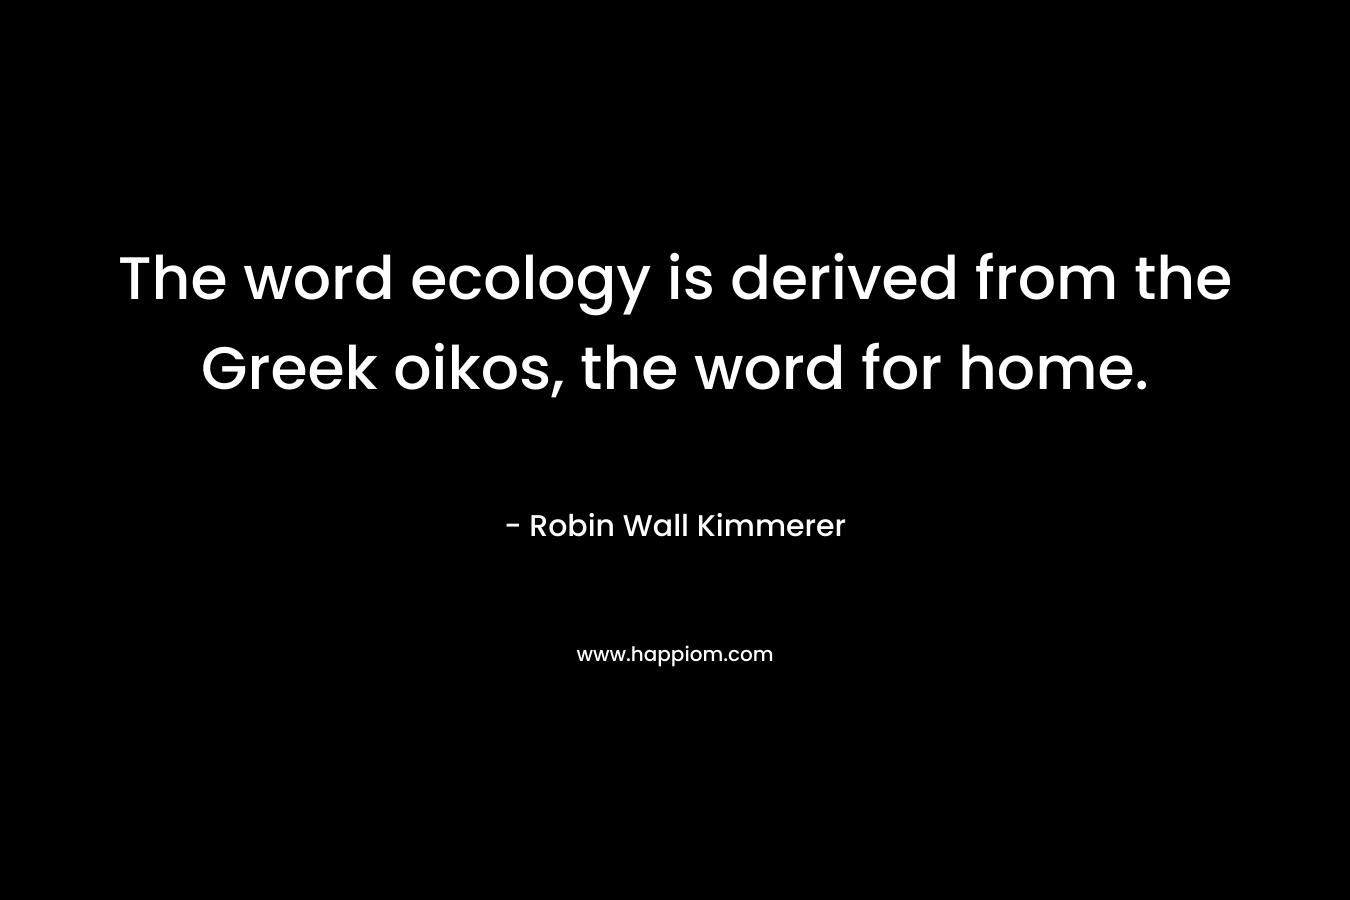 The word ecology is derived from the Greek oikos, the word for home. – Robin Wall Kimmerer